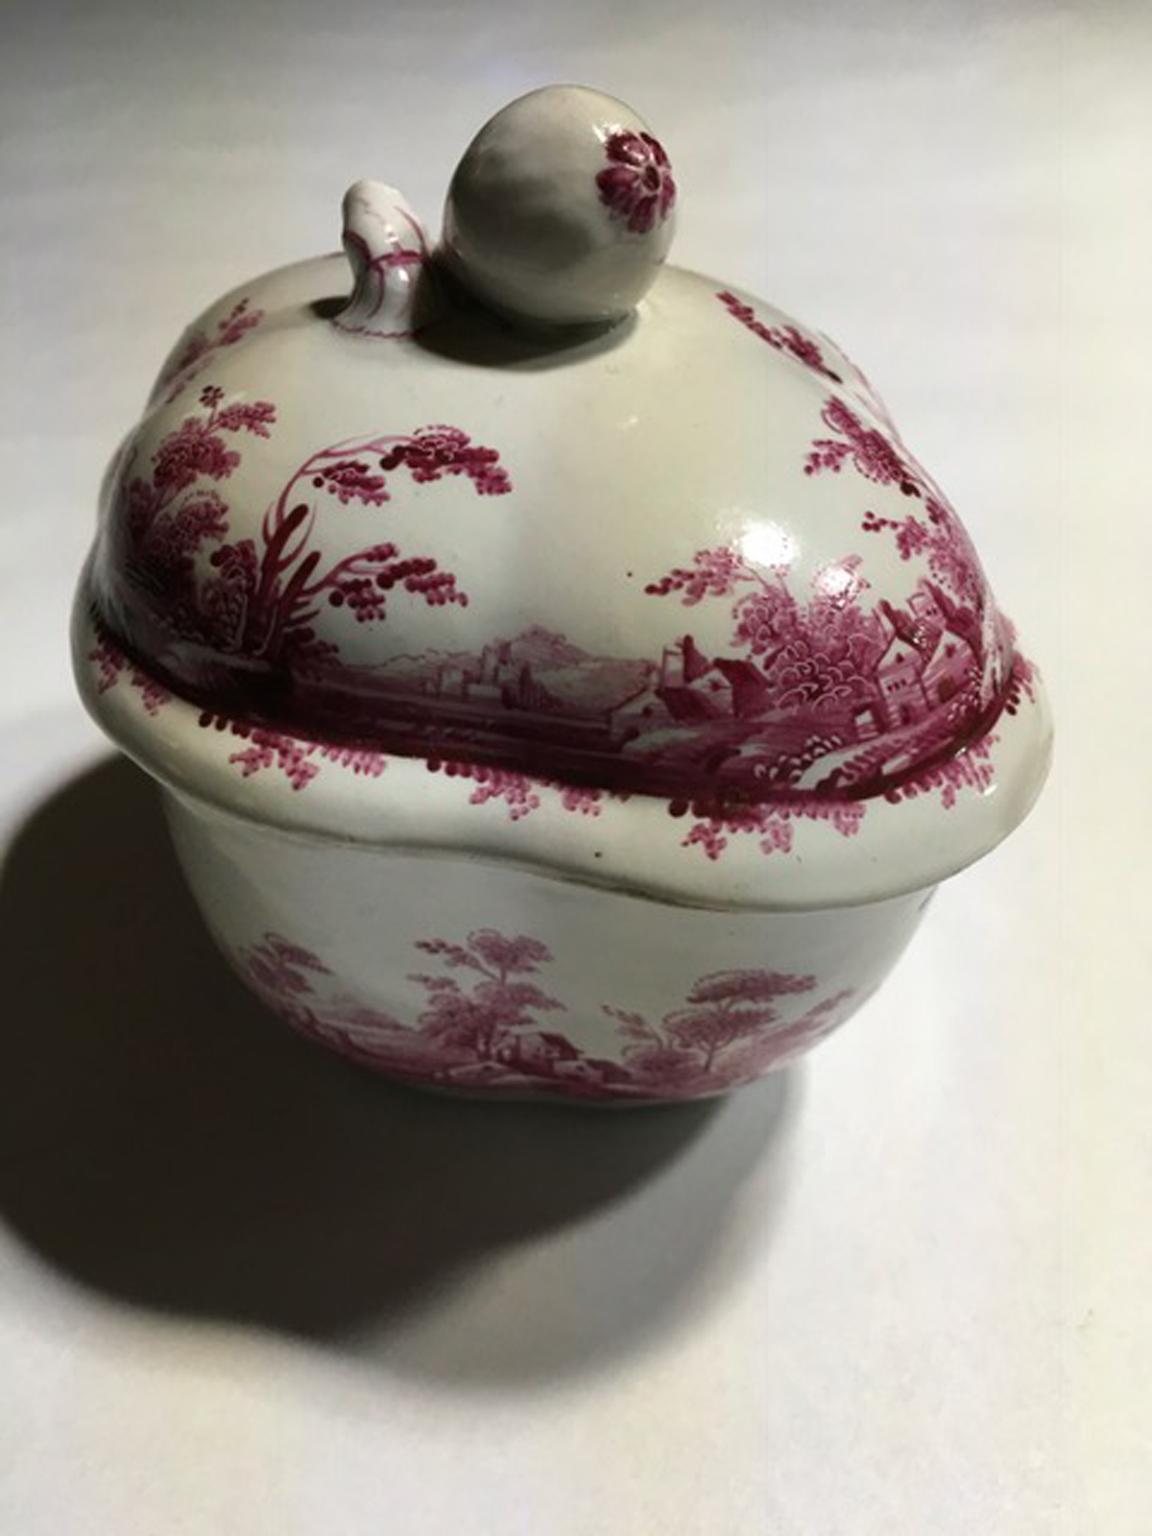 Richard Ginori mid-18th Century porcelain sugar bowl with pink landscapes drawings, hand made in  Italy

This very elegant Richard Ginori porcelain sugar bowl was hand painted with country sides landscapes in pink.

The fine drawings are very